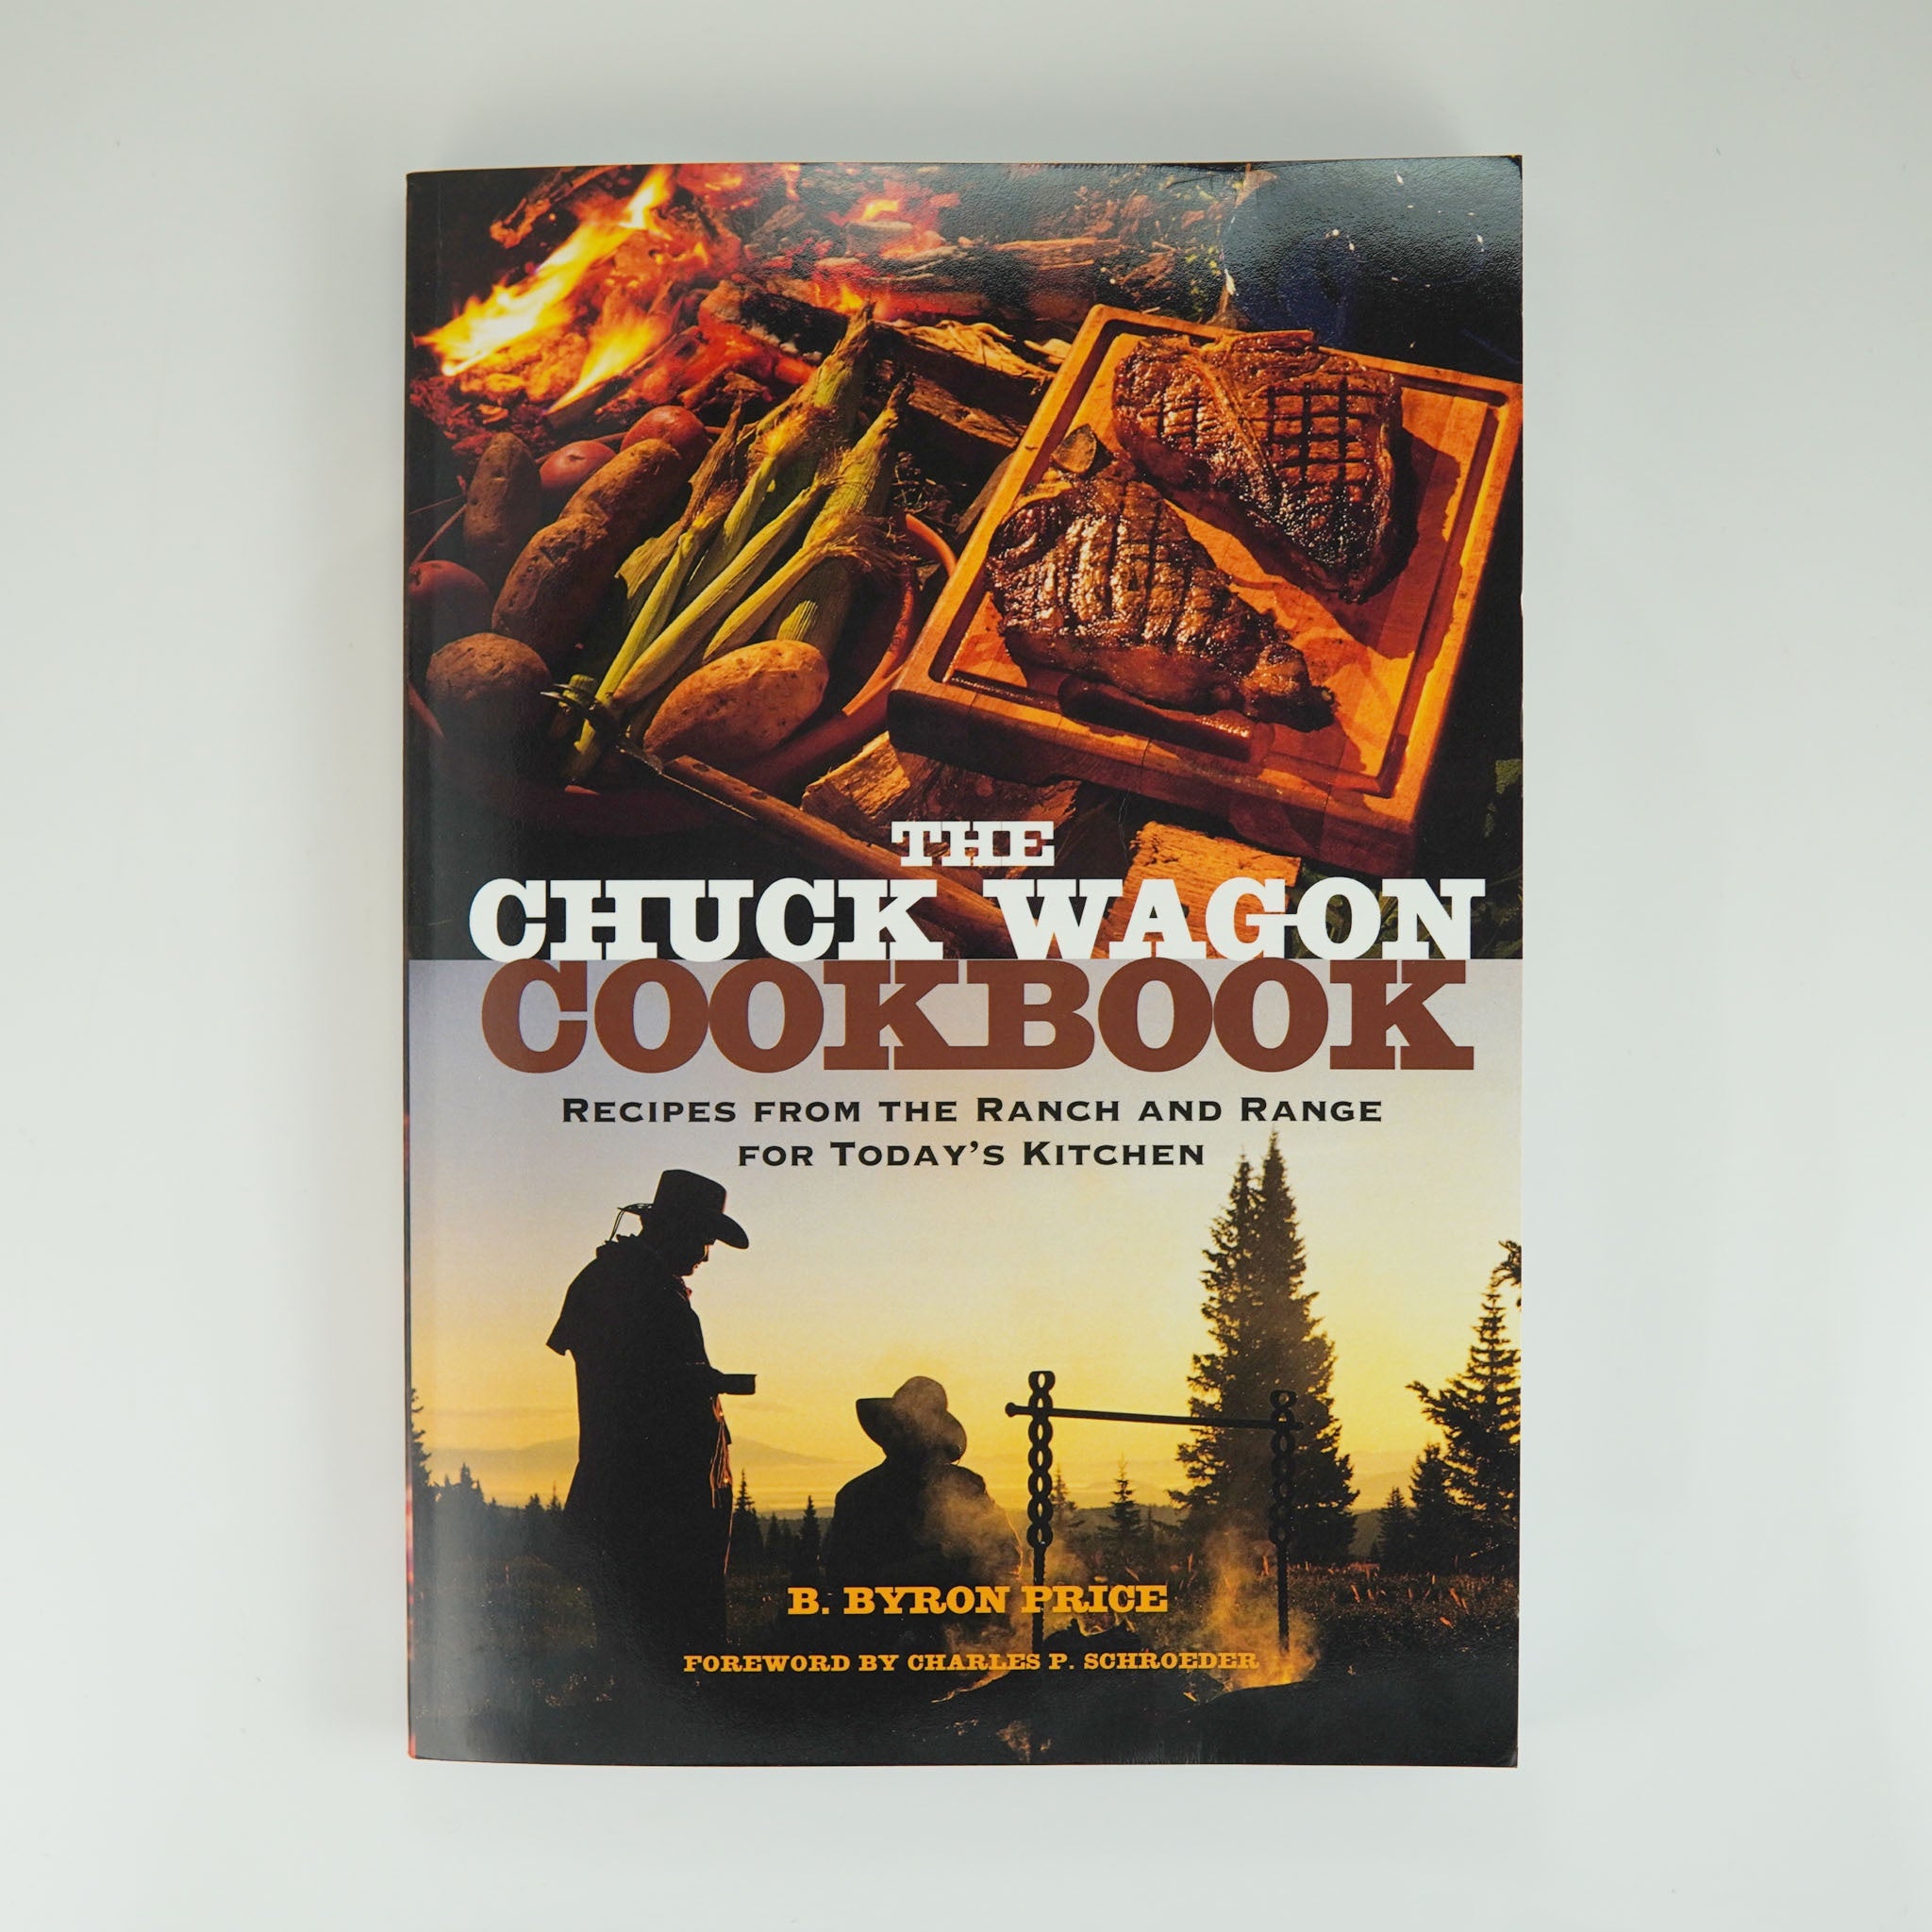 BKCK 15 CHUCK WAGON COOKBOOK RECIPES FROM THE RANCH AND RANGER FOR TODAY'S KITCHEN BY BYRON PRICE #21021070 D2 APR24